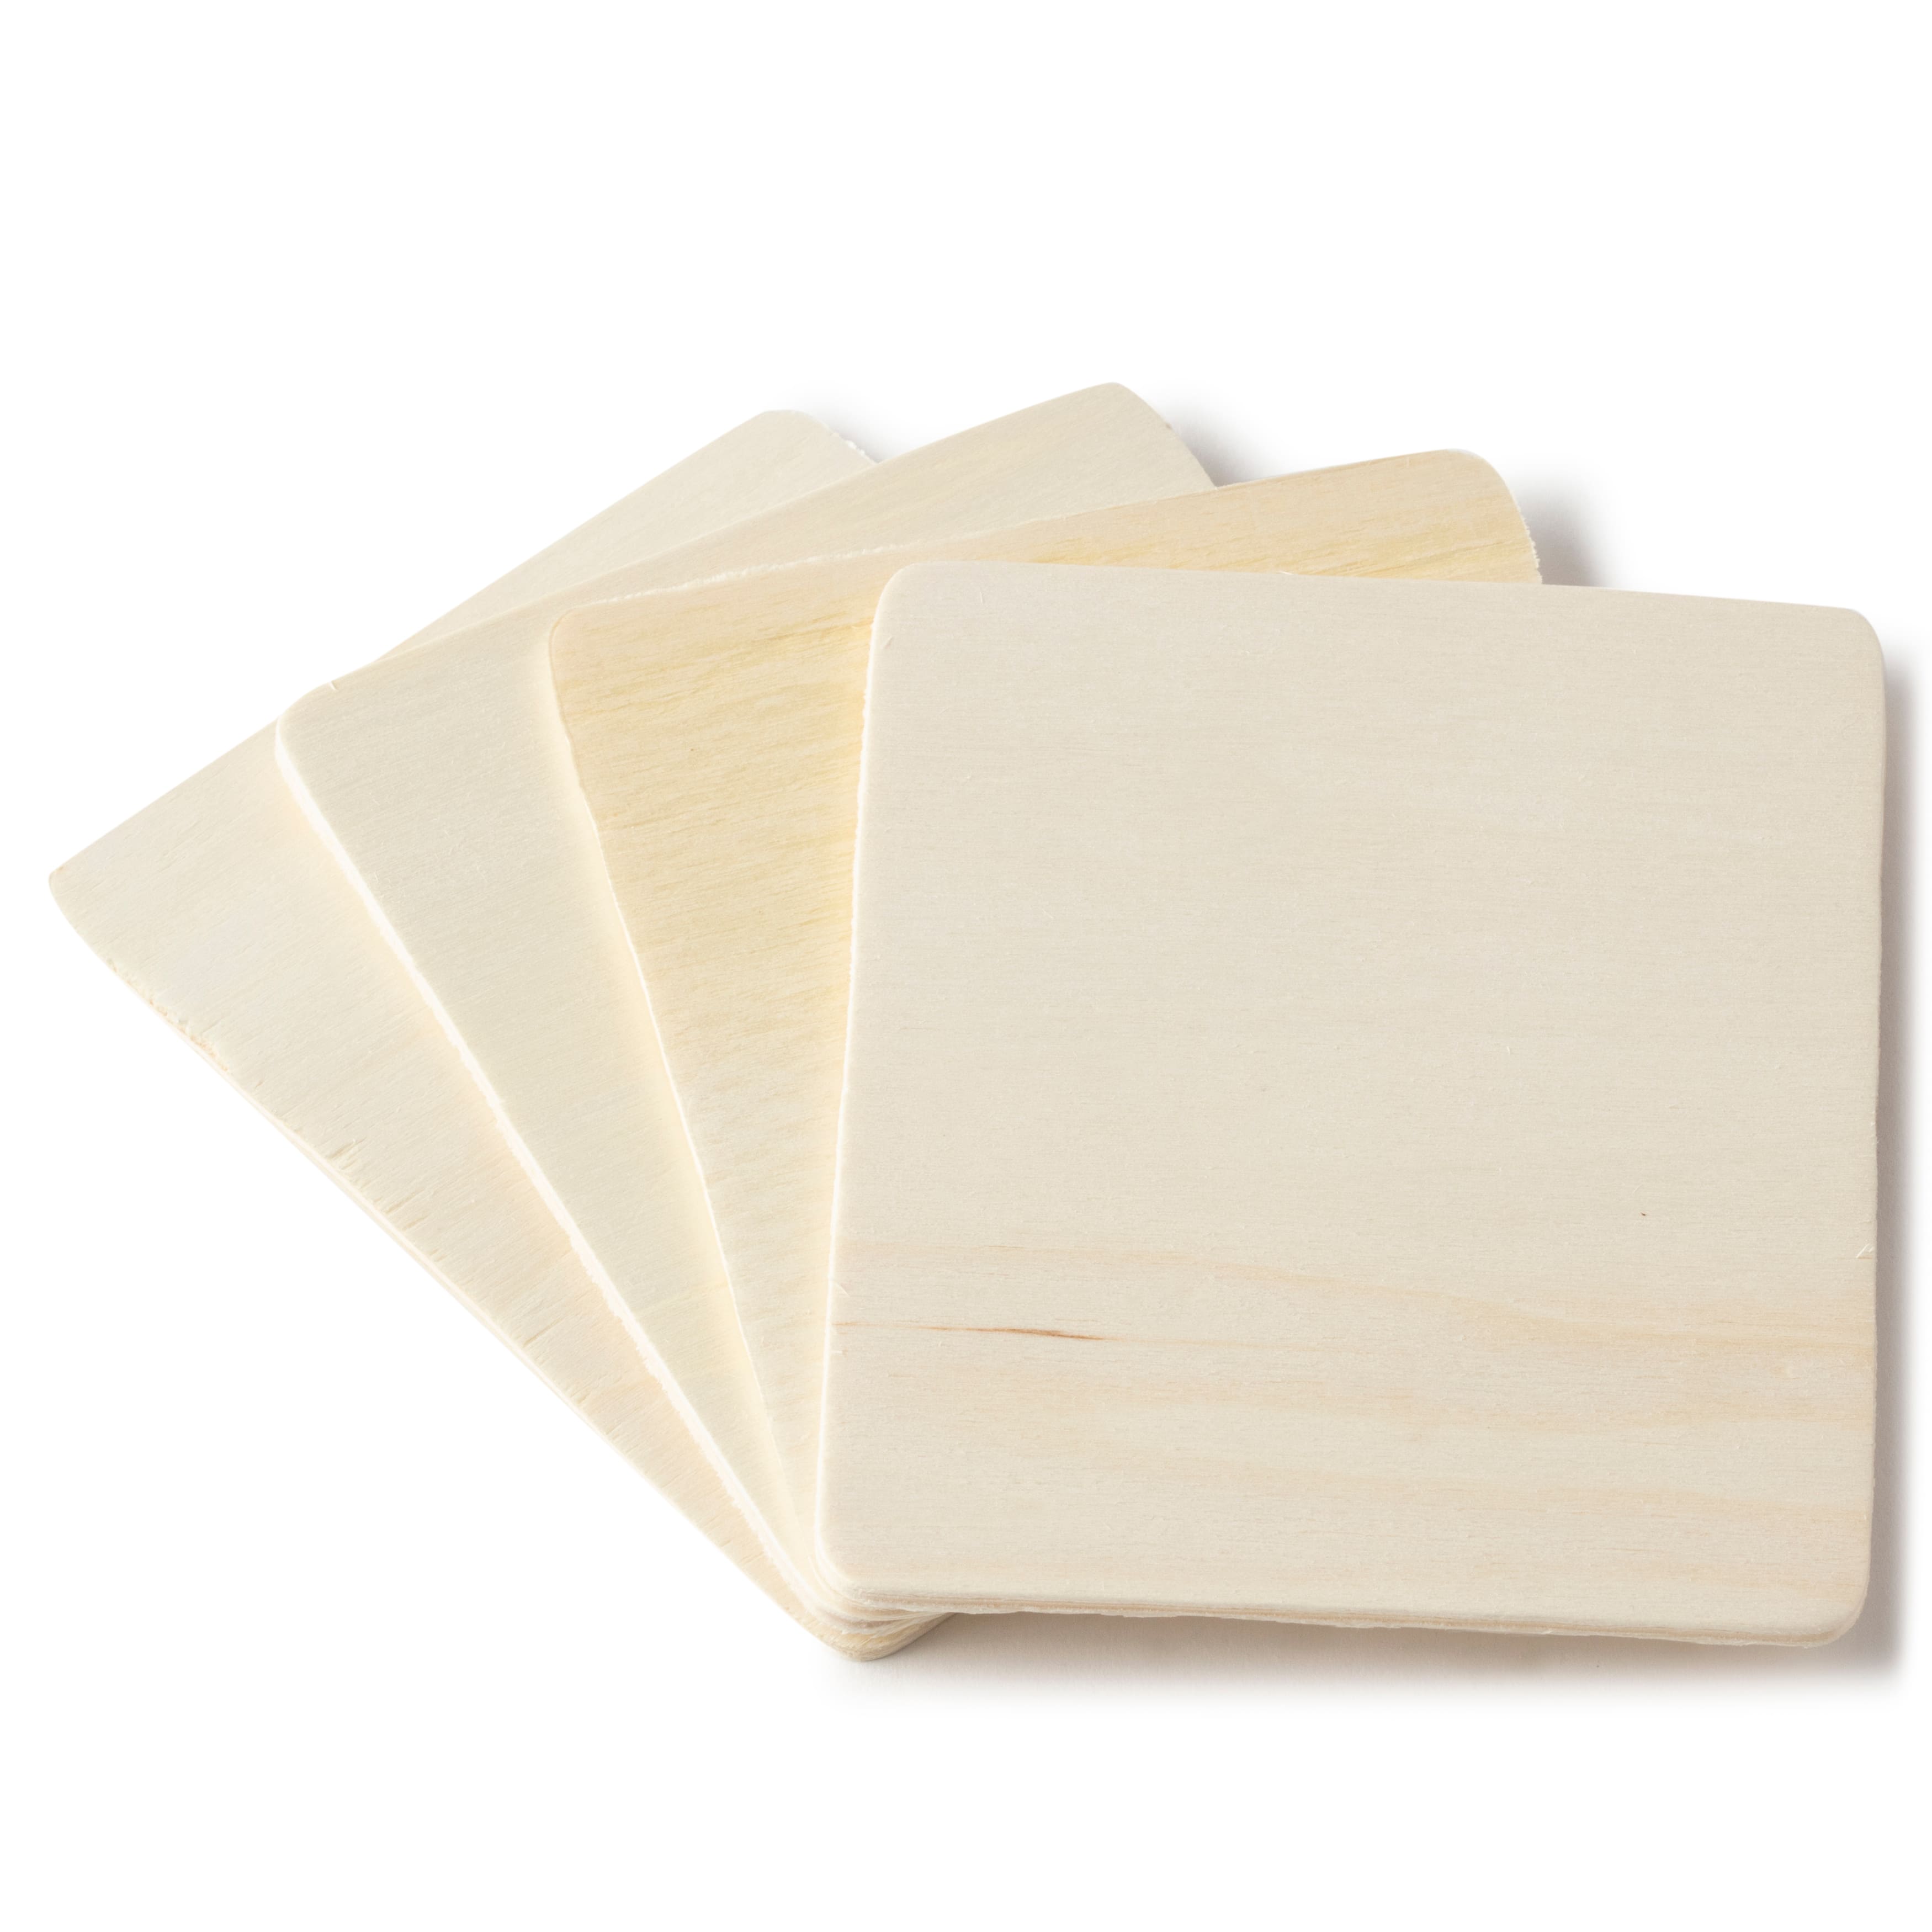 12 Packs: 4 ct. (48 total) 4.5&#x22; Wood Rectangles by Make Market&#xAE;